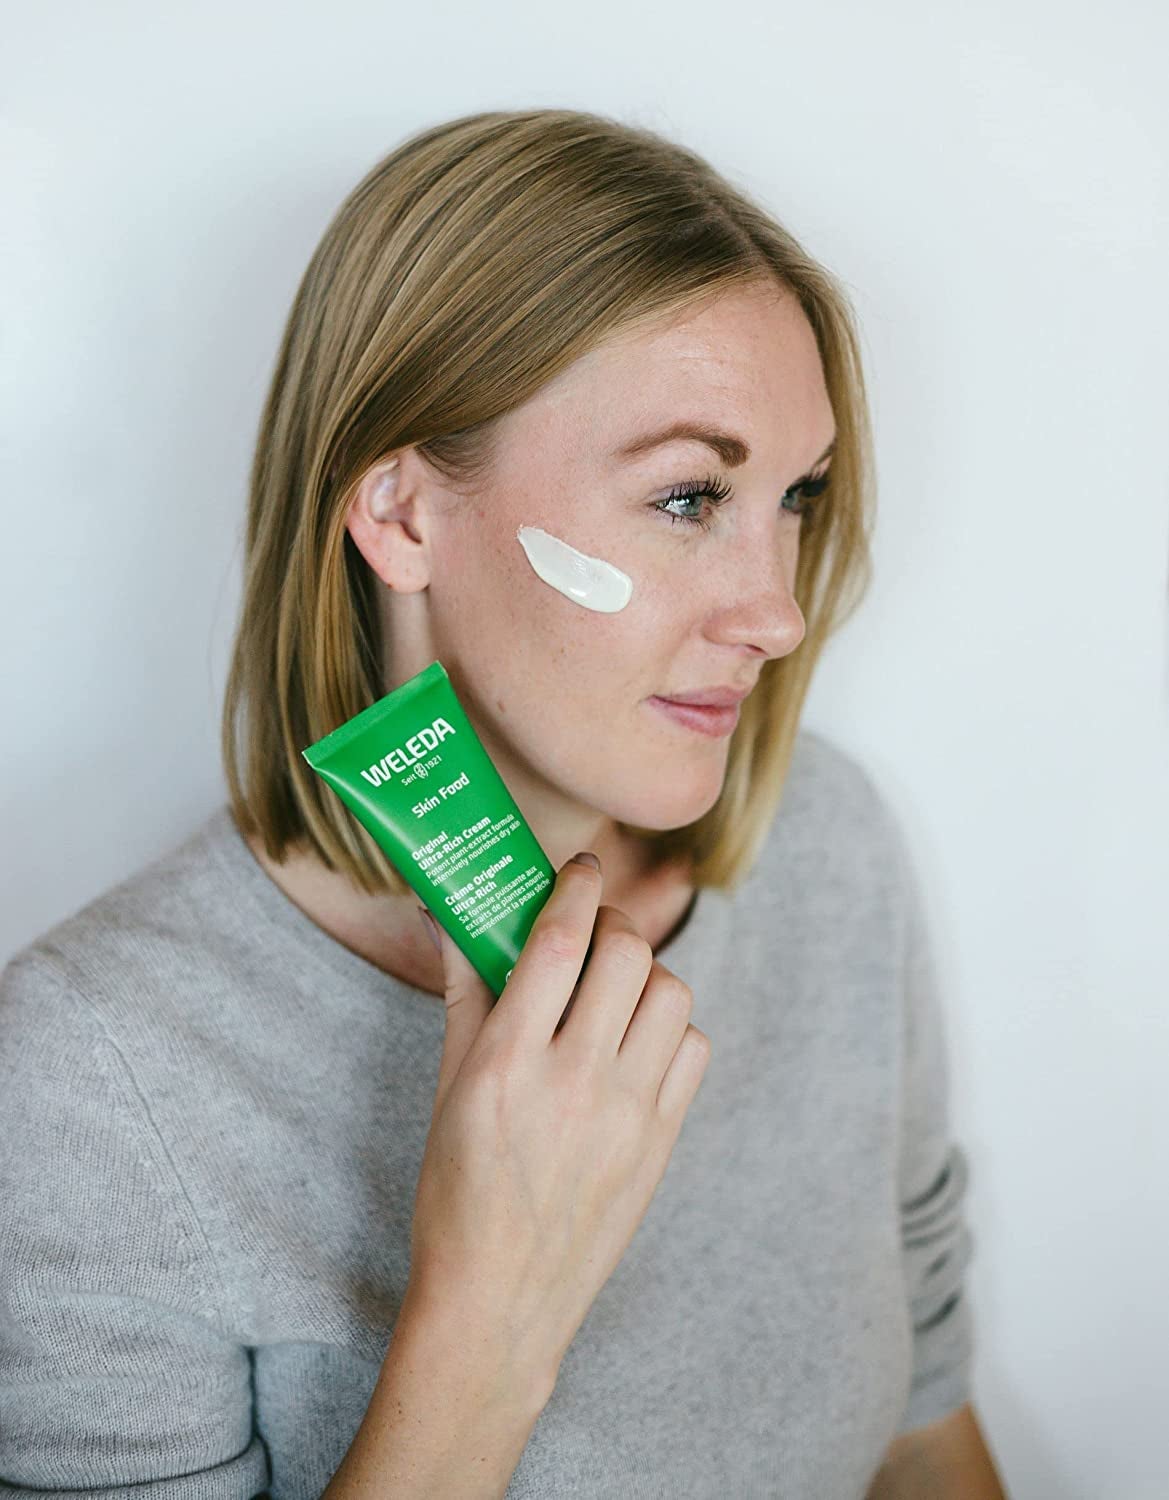 model holding the green tube next to her face with a swatched product